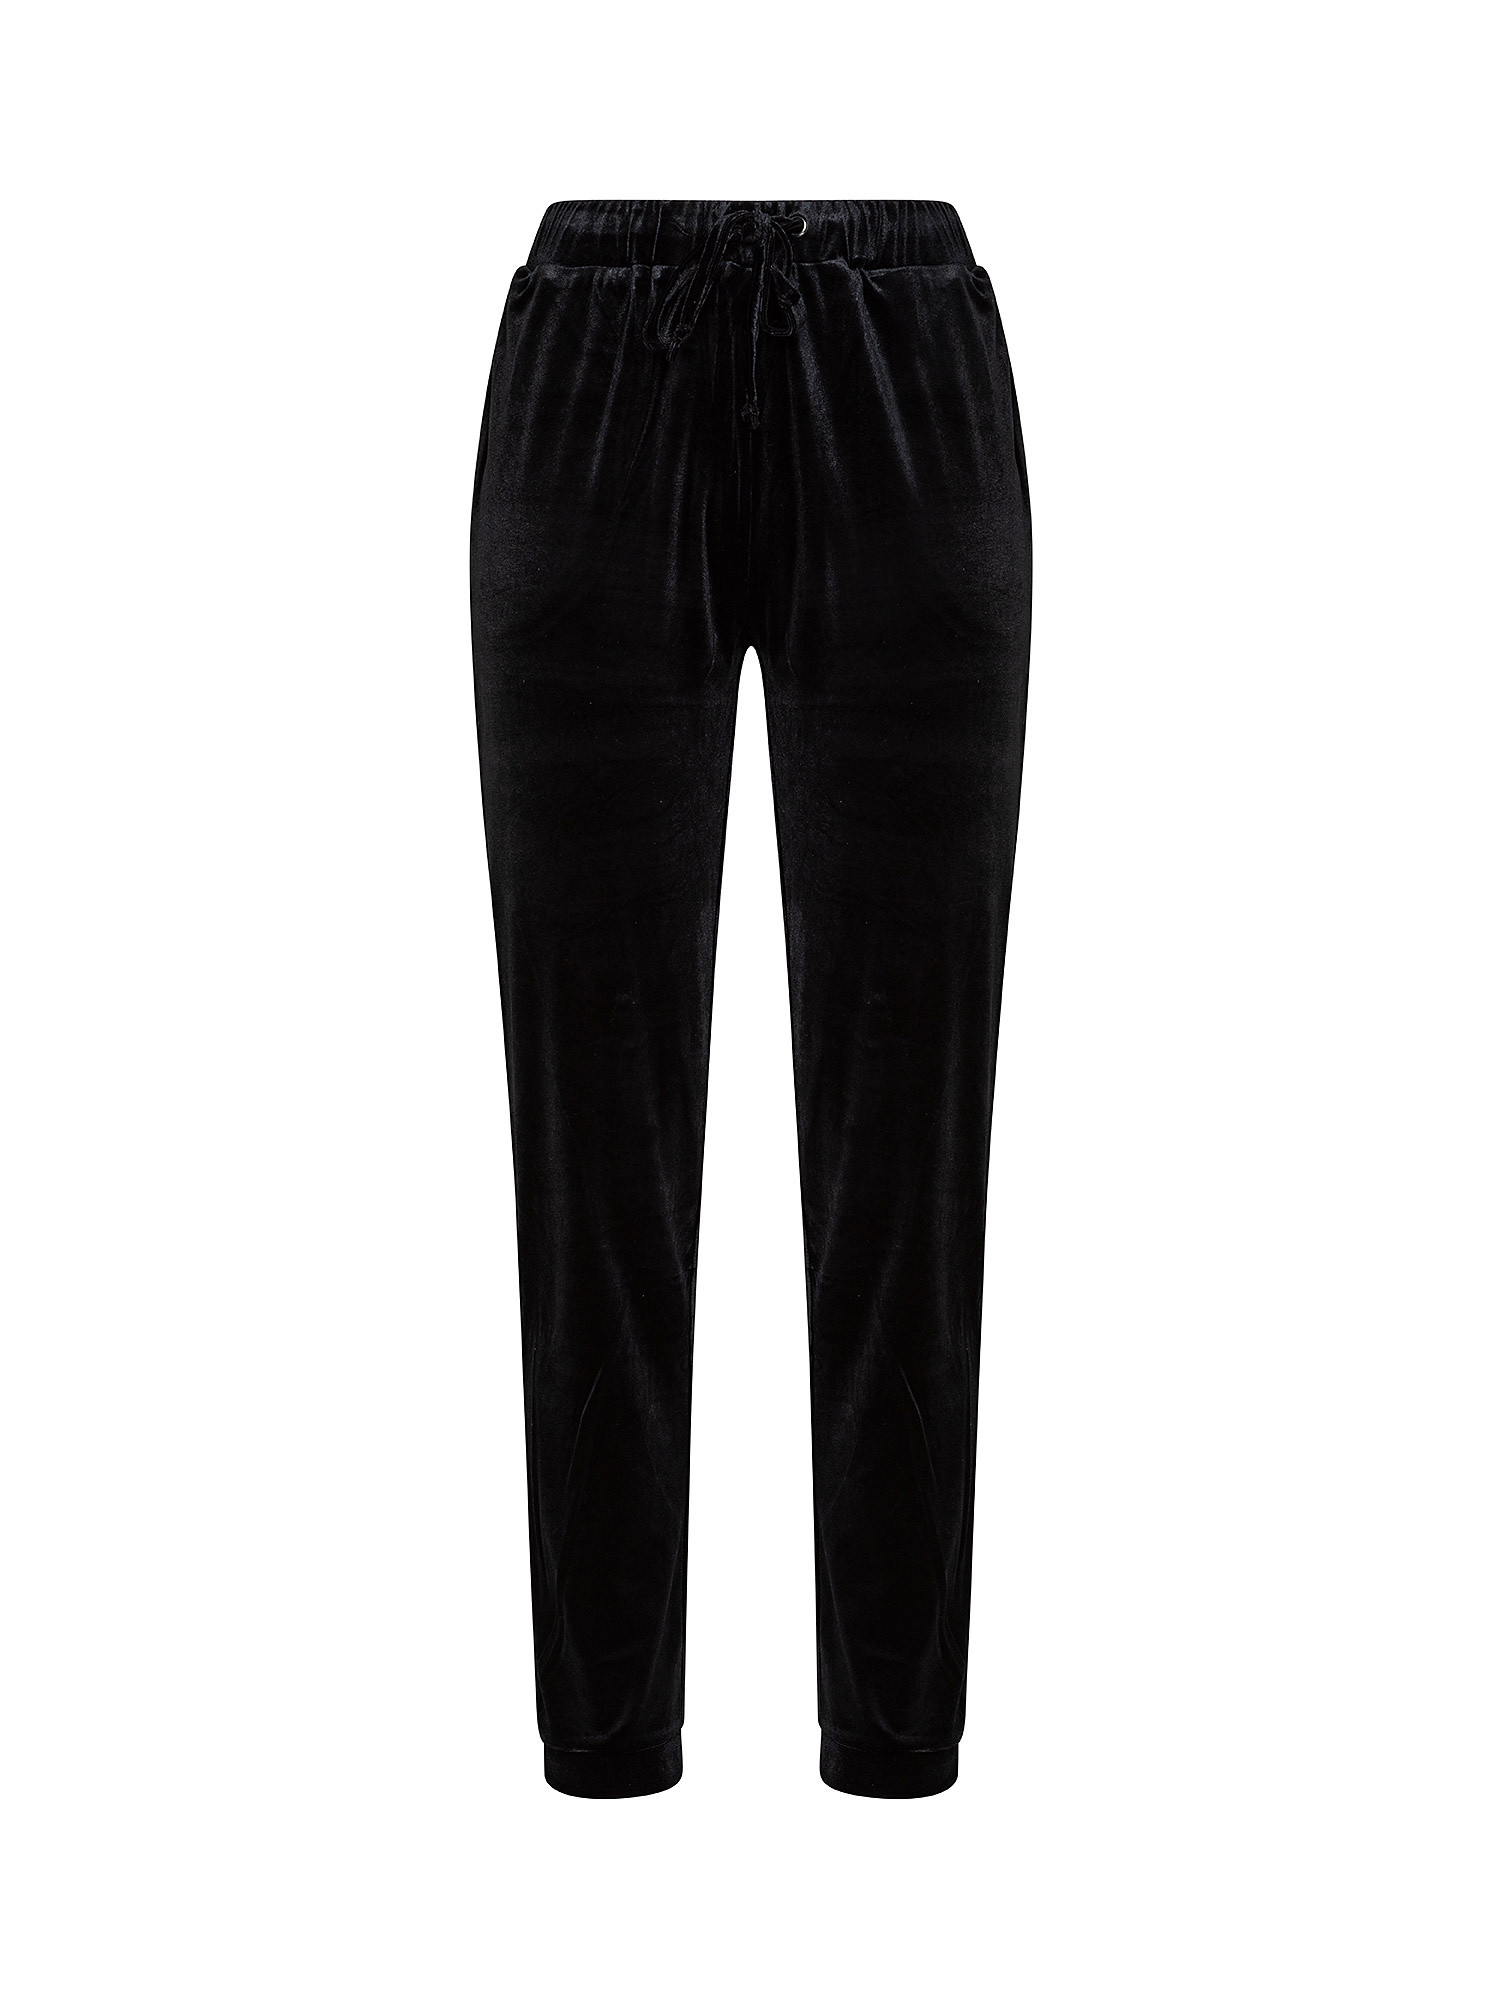 chenille trousers, Black, large image number 0